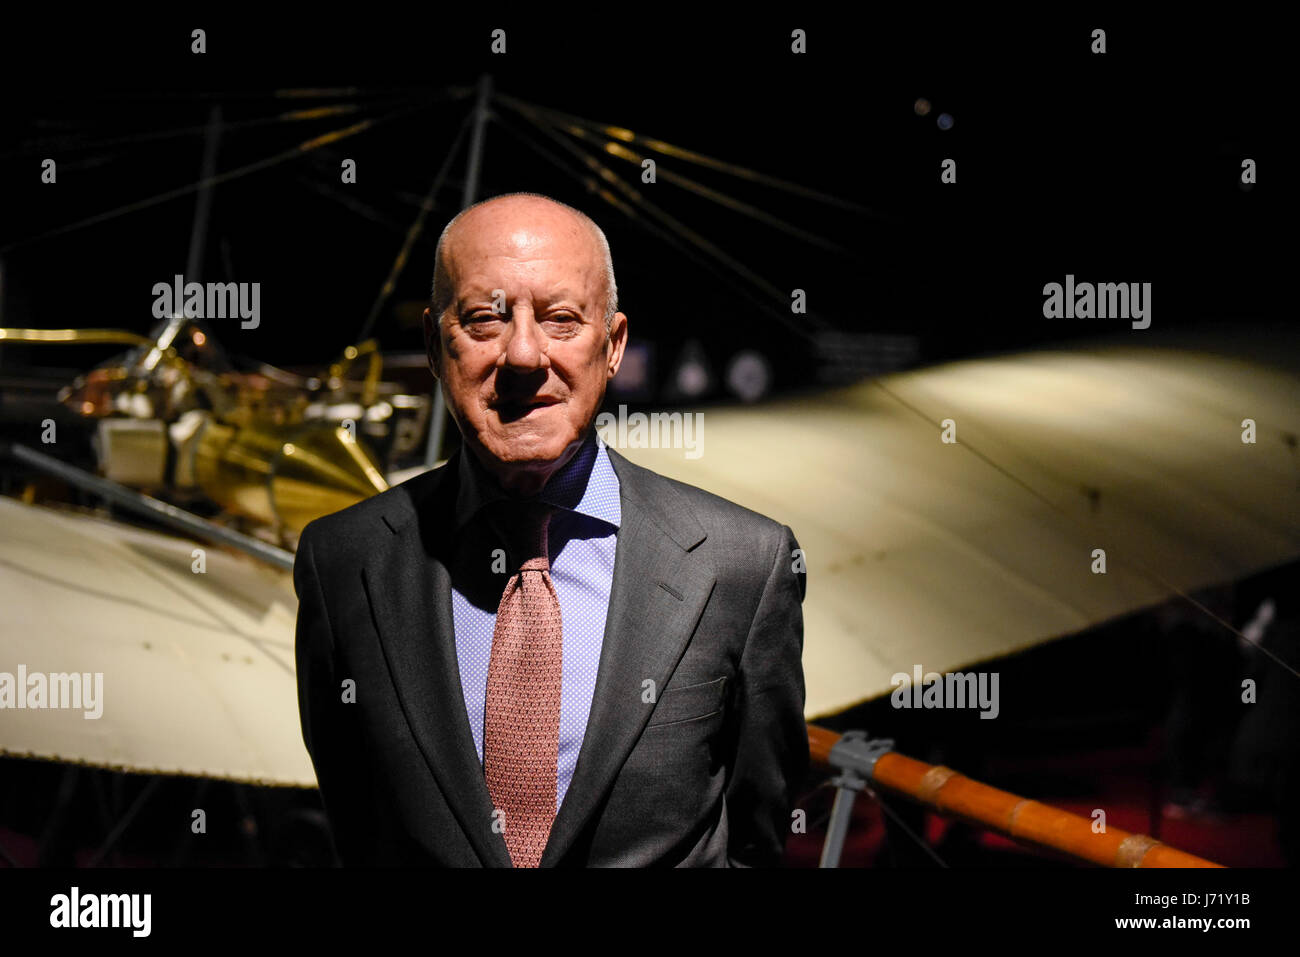 London, UK. 23rd May, 2017. Norman Foster stands in front of a replica Santos-Dumont 20 aeroplane at the press preview of 'Cartier in Motion', an exhibition on Cartier, co-curated by celebrated architect Lord Norman Foster and Design Museum director Deyan Sudjic, at the Design Museum in London. The exhibition runs from 25 May to 28 July 2017. Credit: Stephen Chung/Alamy Live News Stock Photo